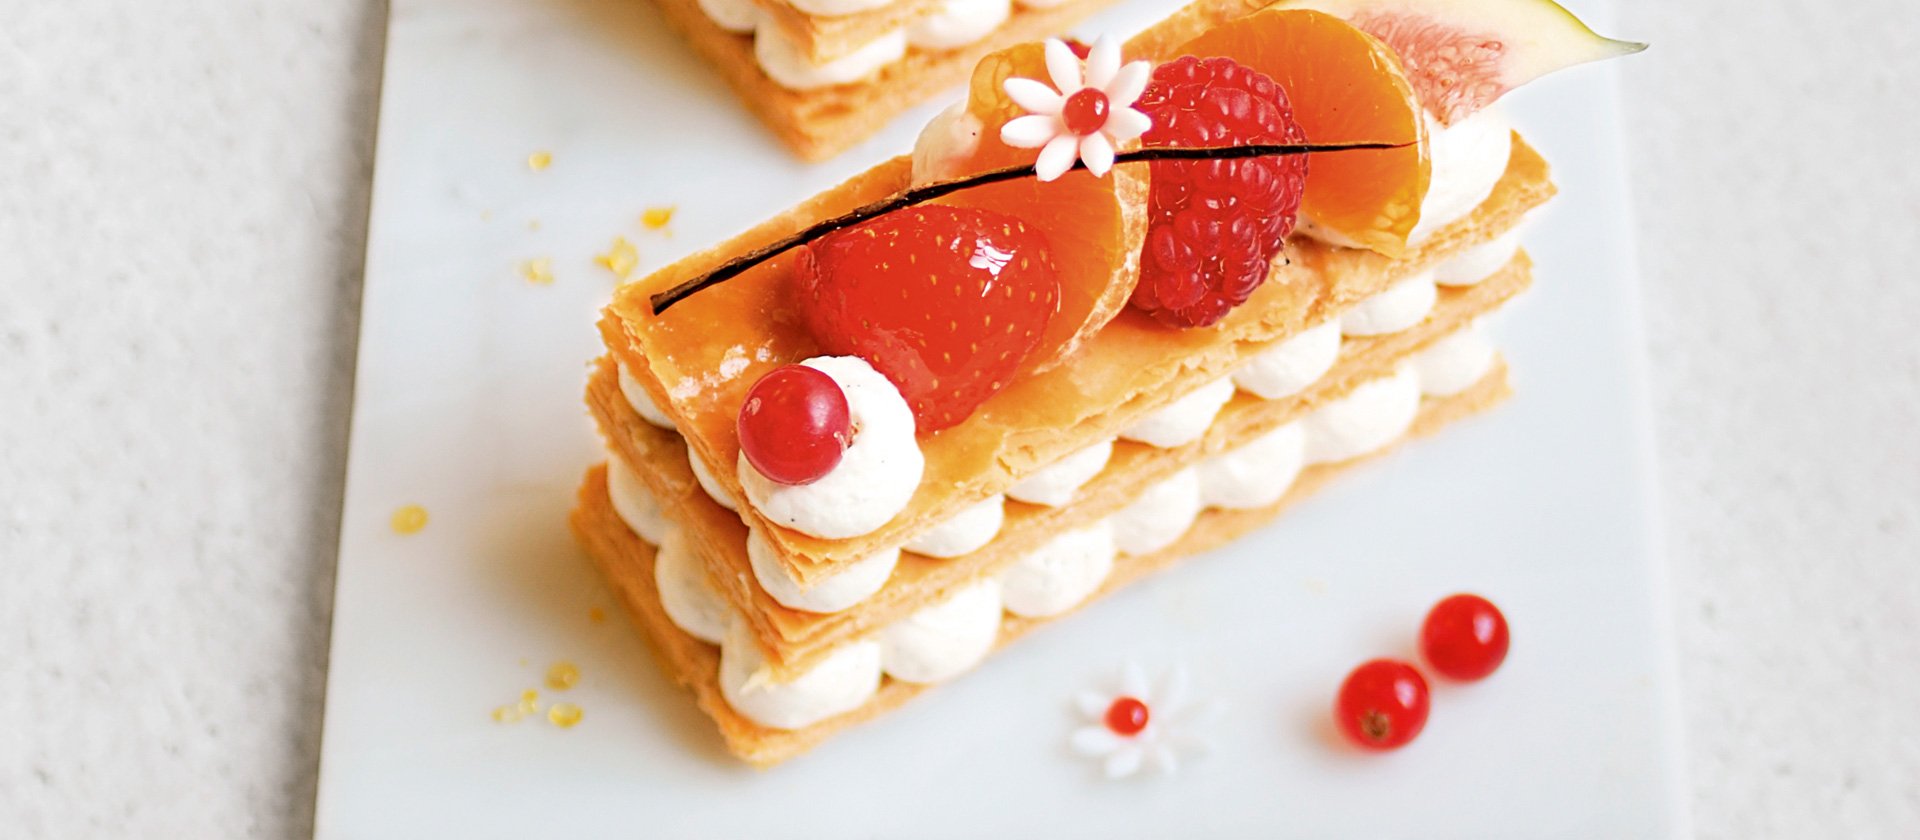 2017 Bastille Day recipe: vanilla Chantilly and fresh fruit mille-feuille